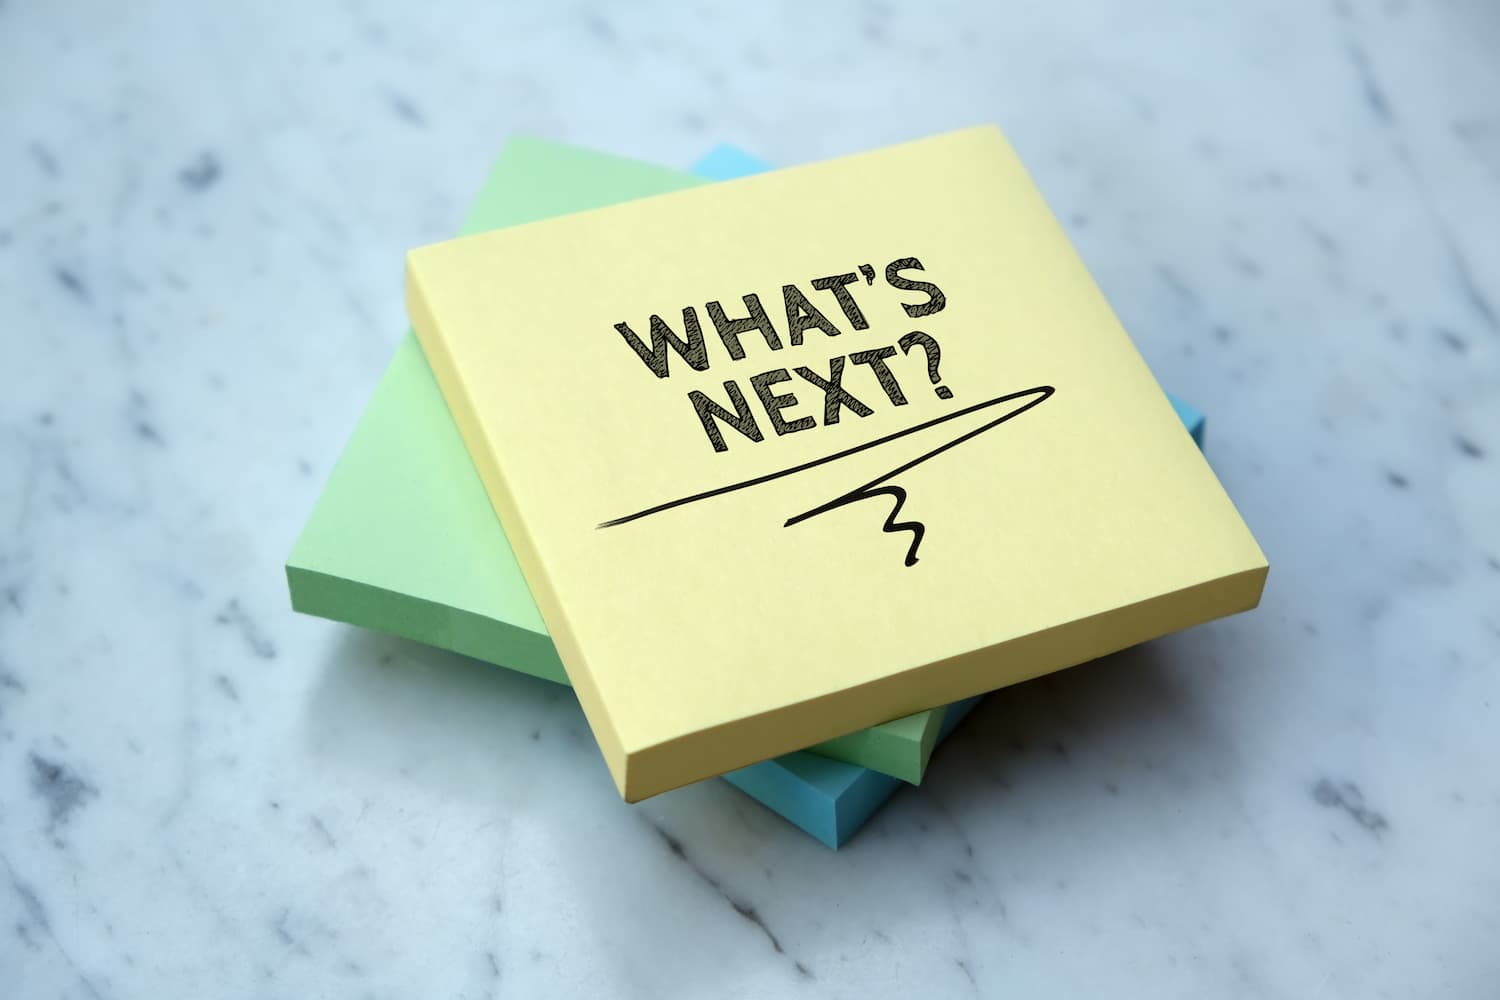 A photo of a post-it that says "What's next?"